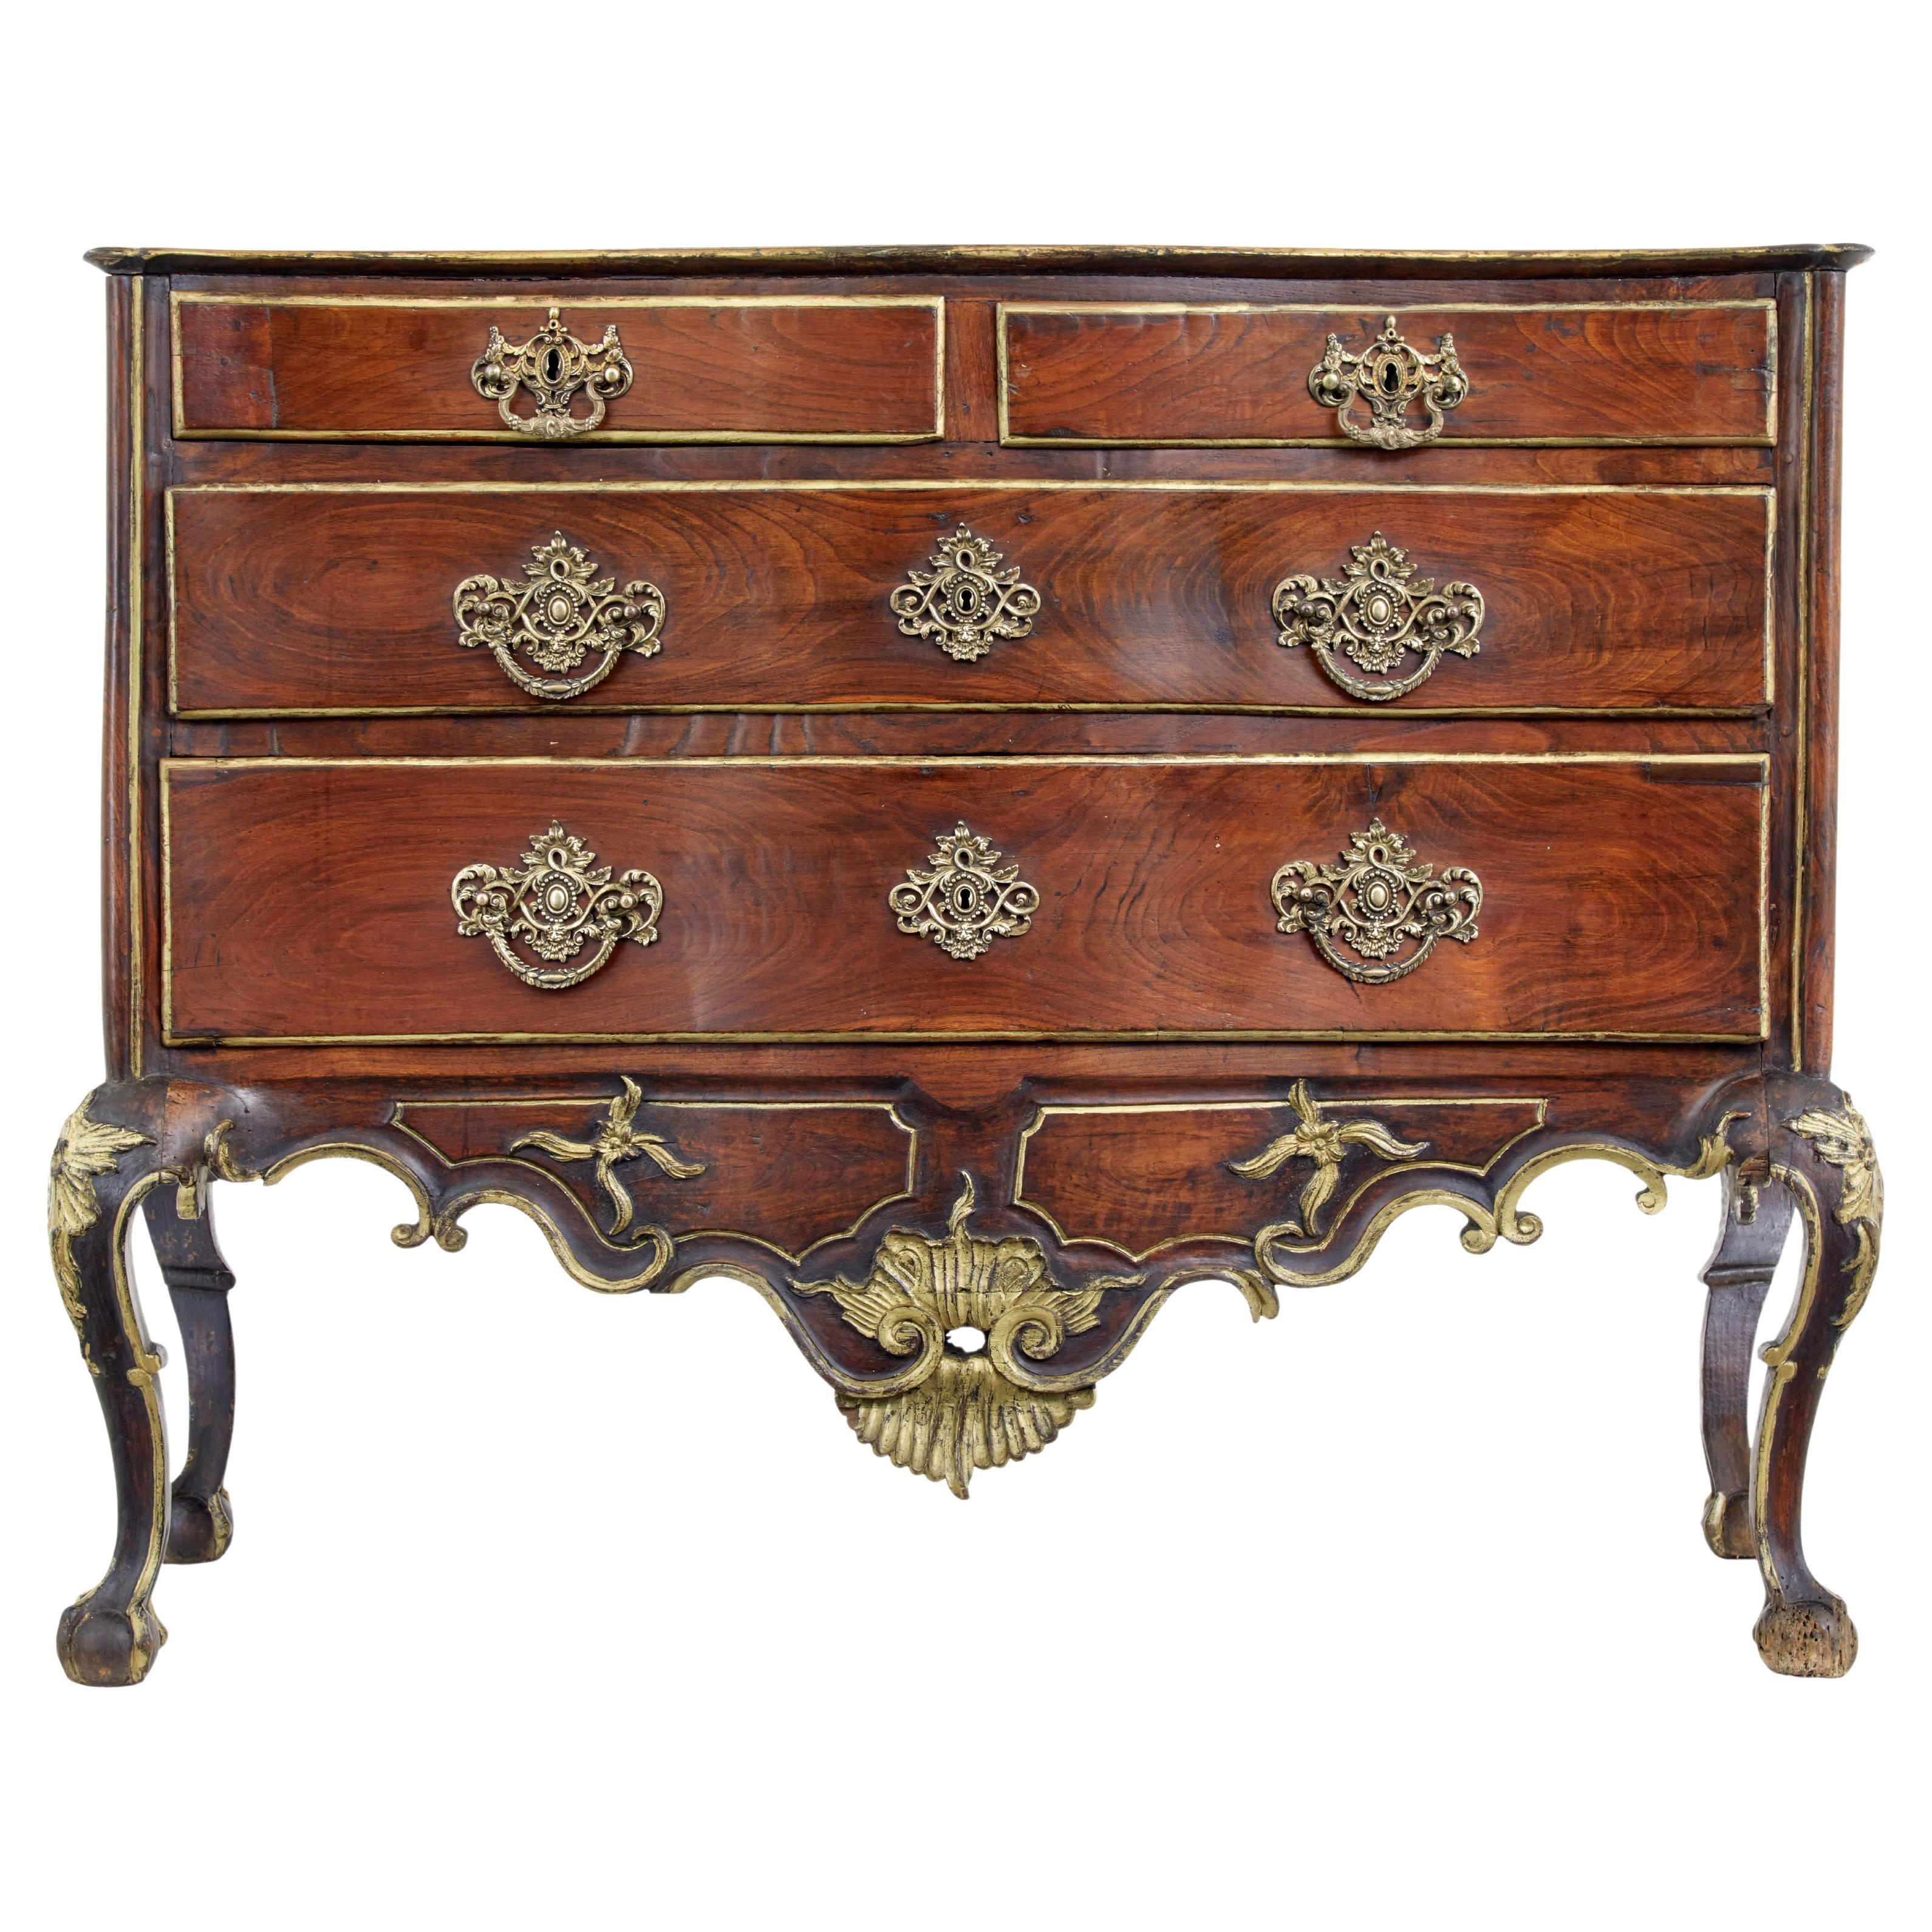 Portuguese 18th century carved walnut and gilt chest of drawers